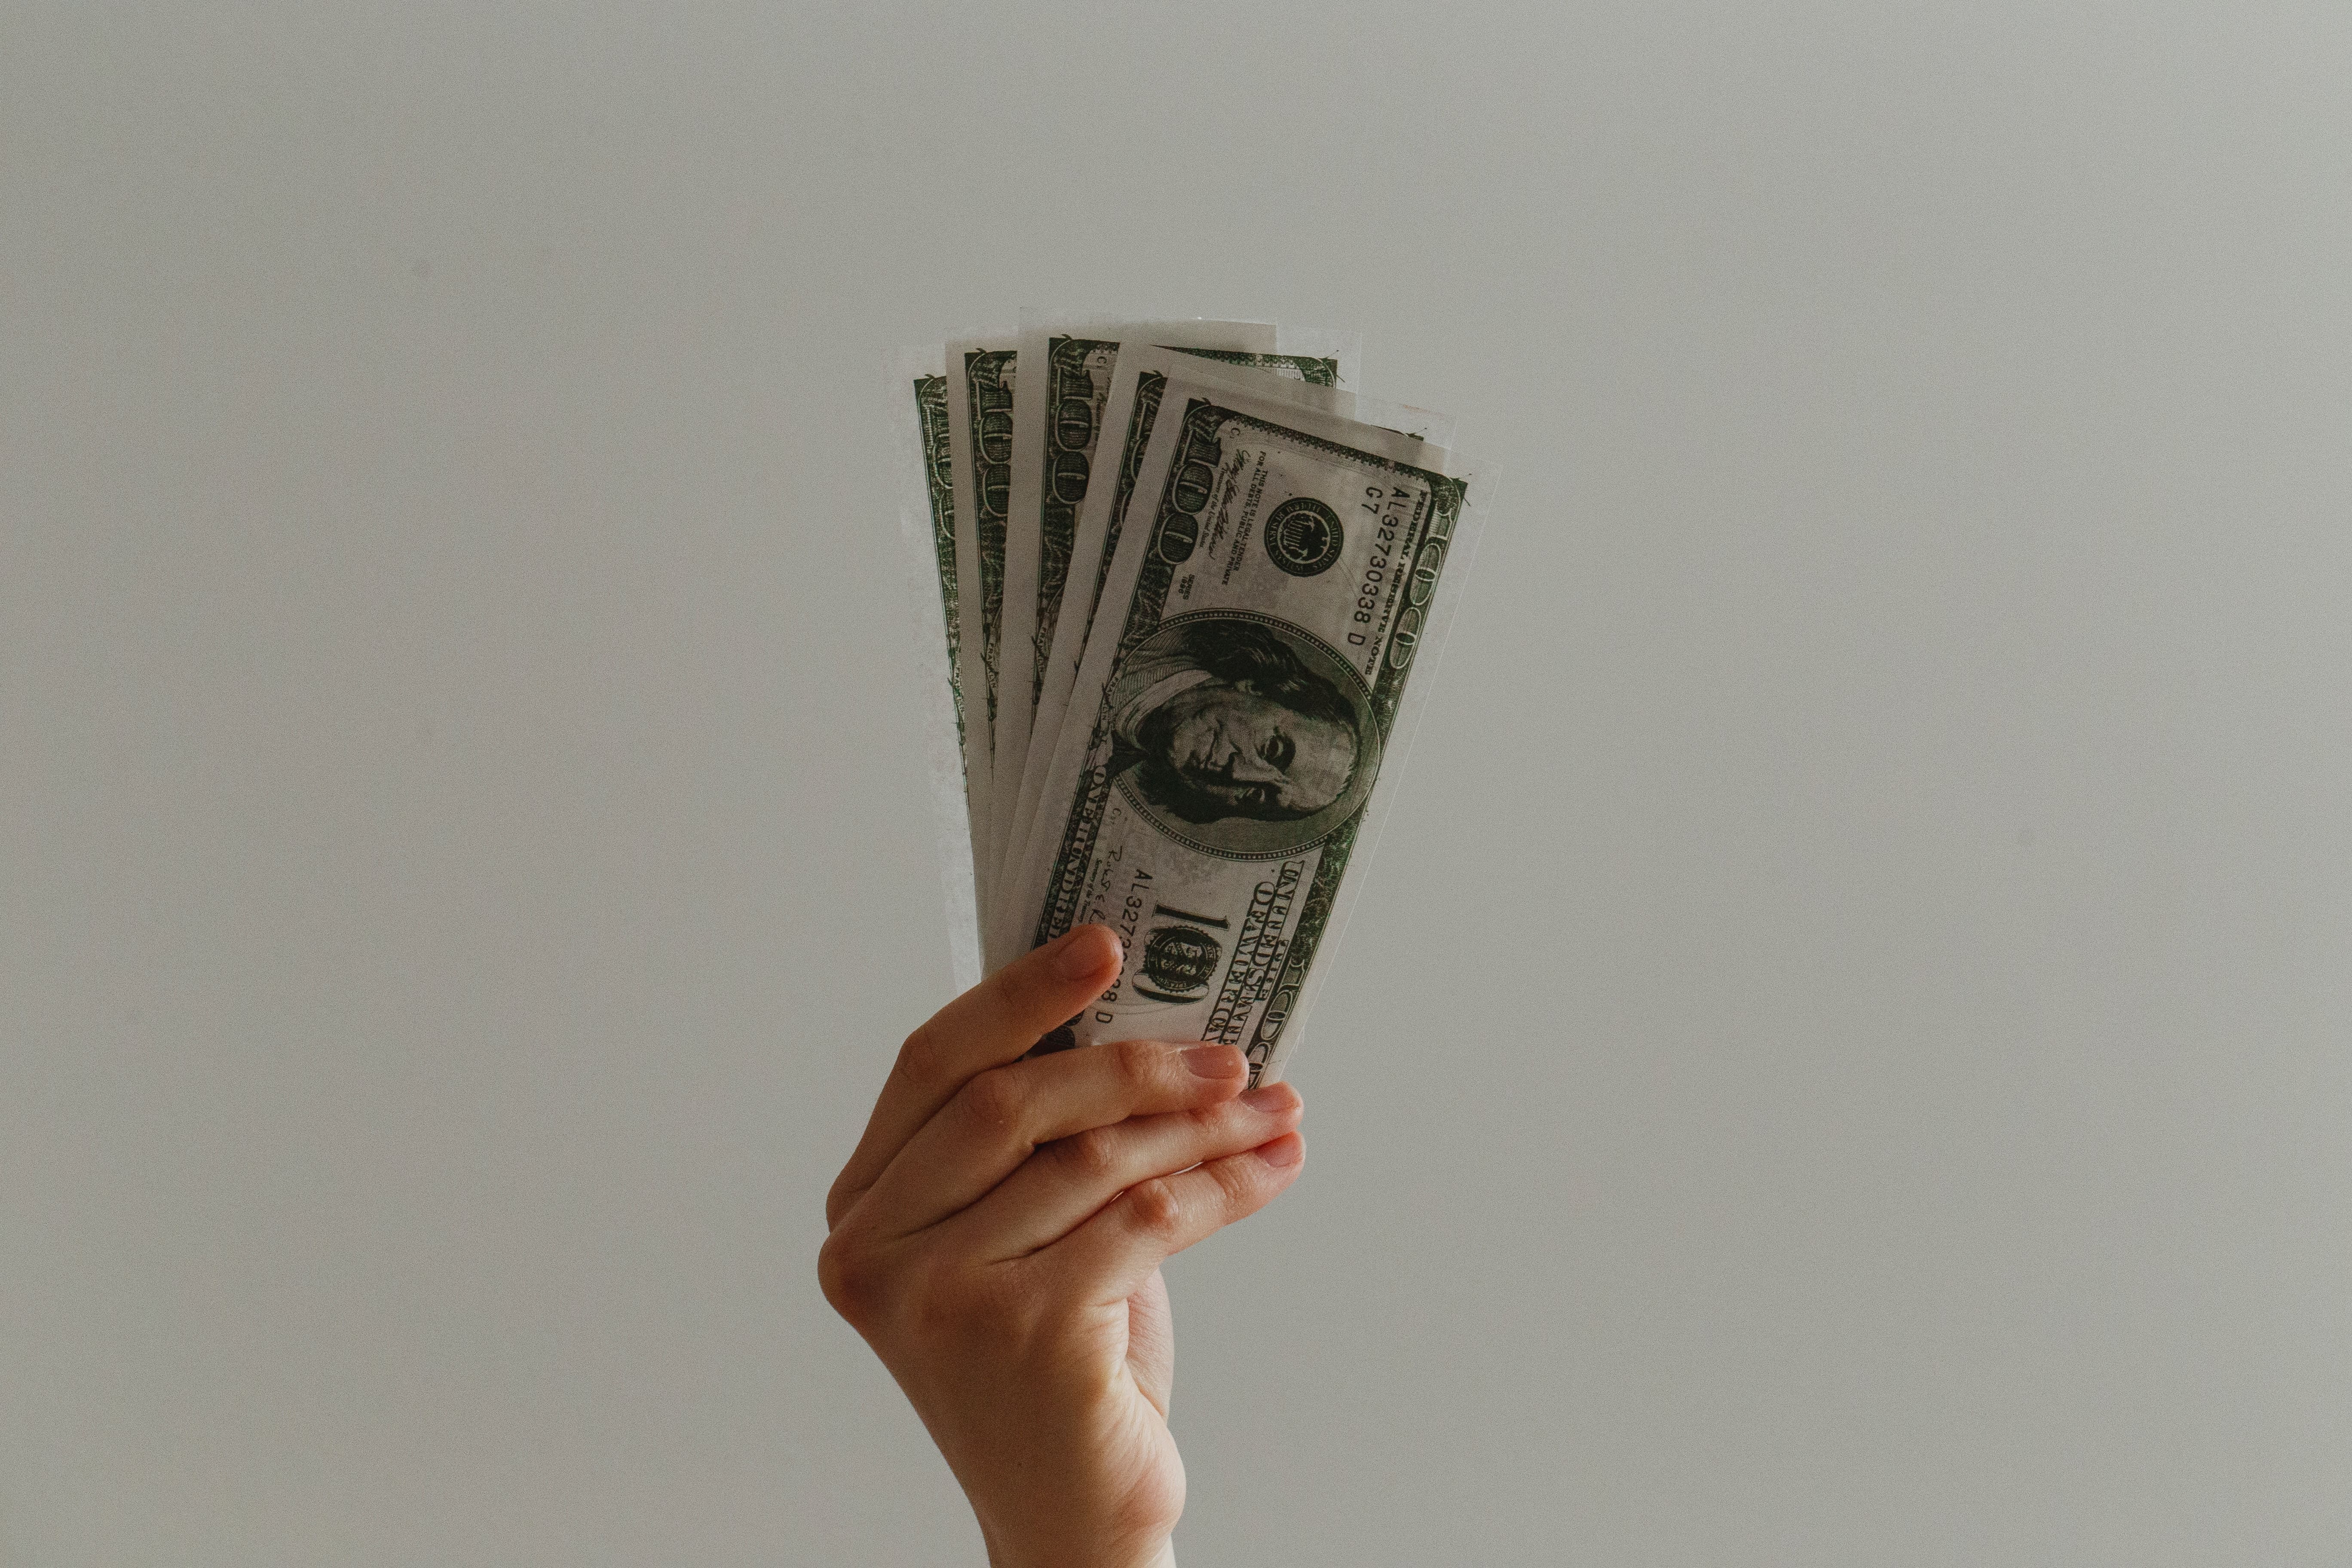 All education workers will get a 3% raise, and all school teachers and specialists will get a 9% raise in Gov. John Carney's budget recommendations for next year. (Unsplash)